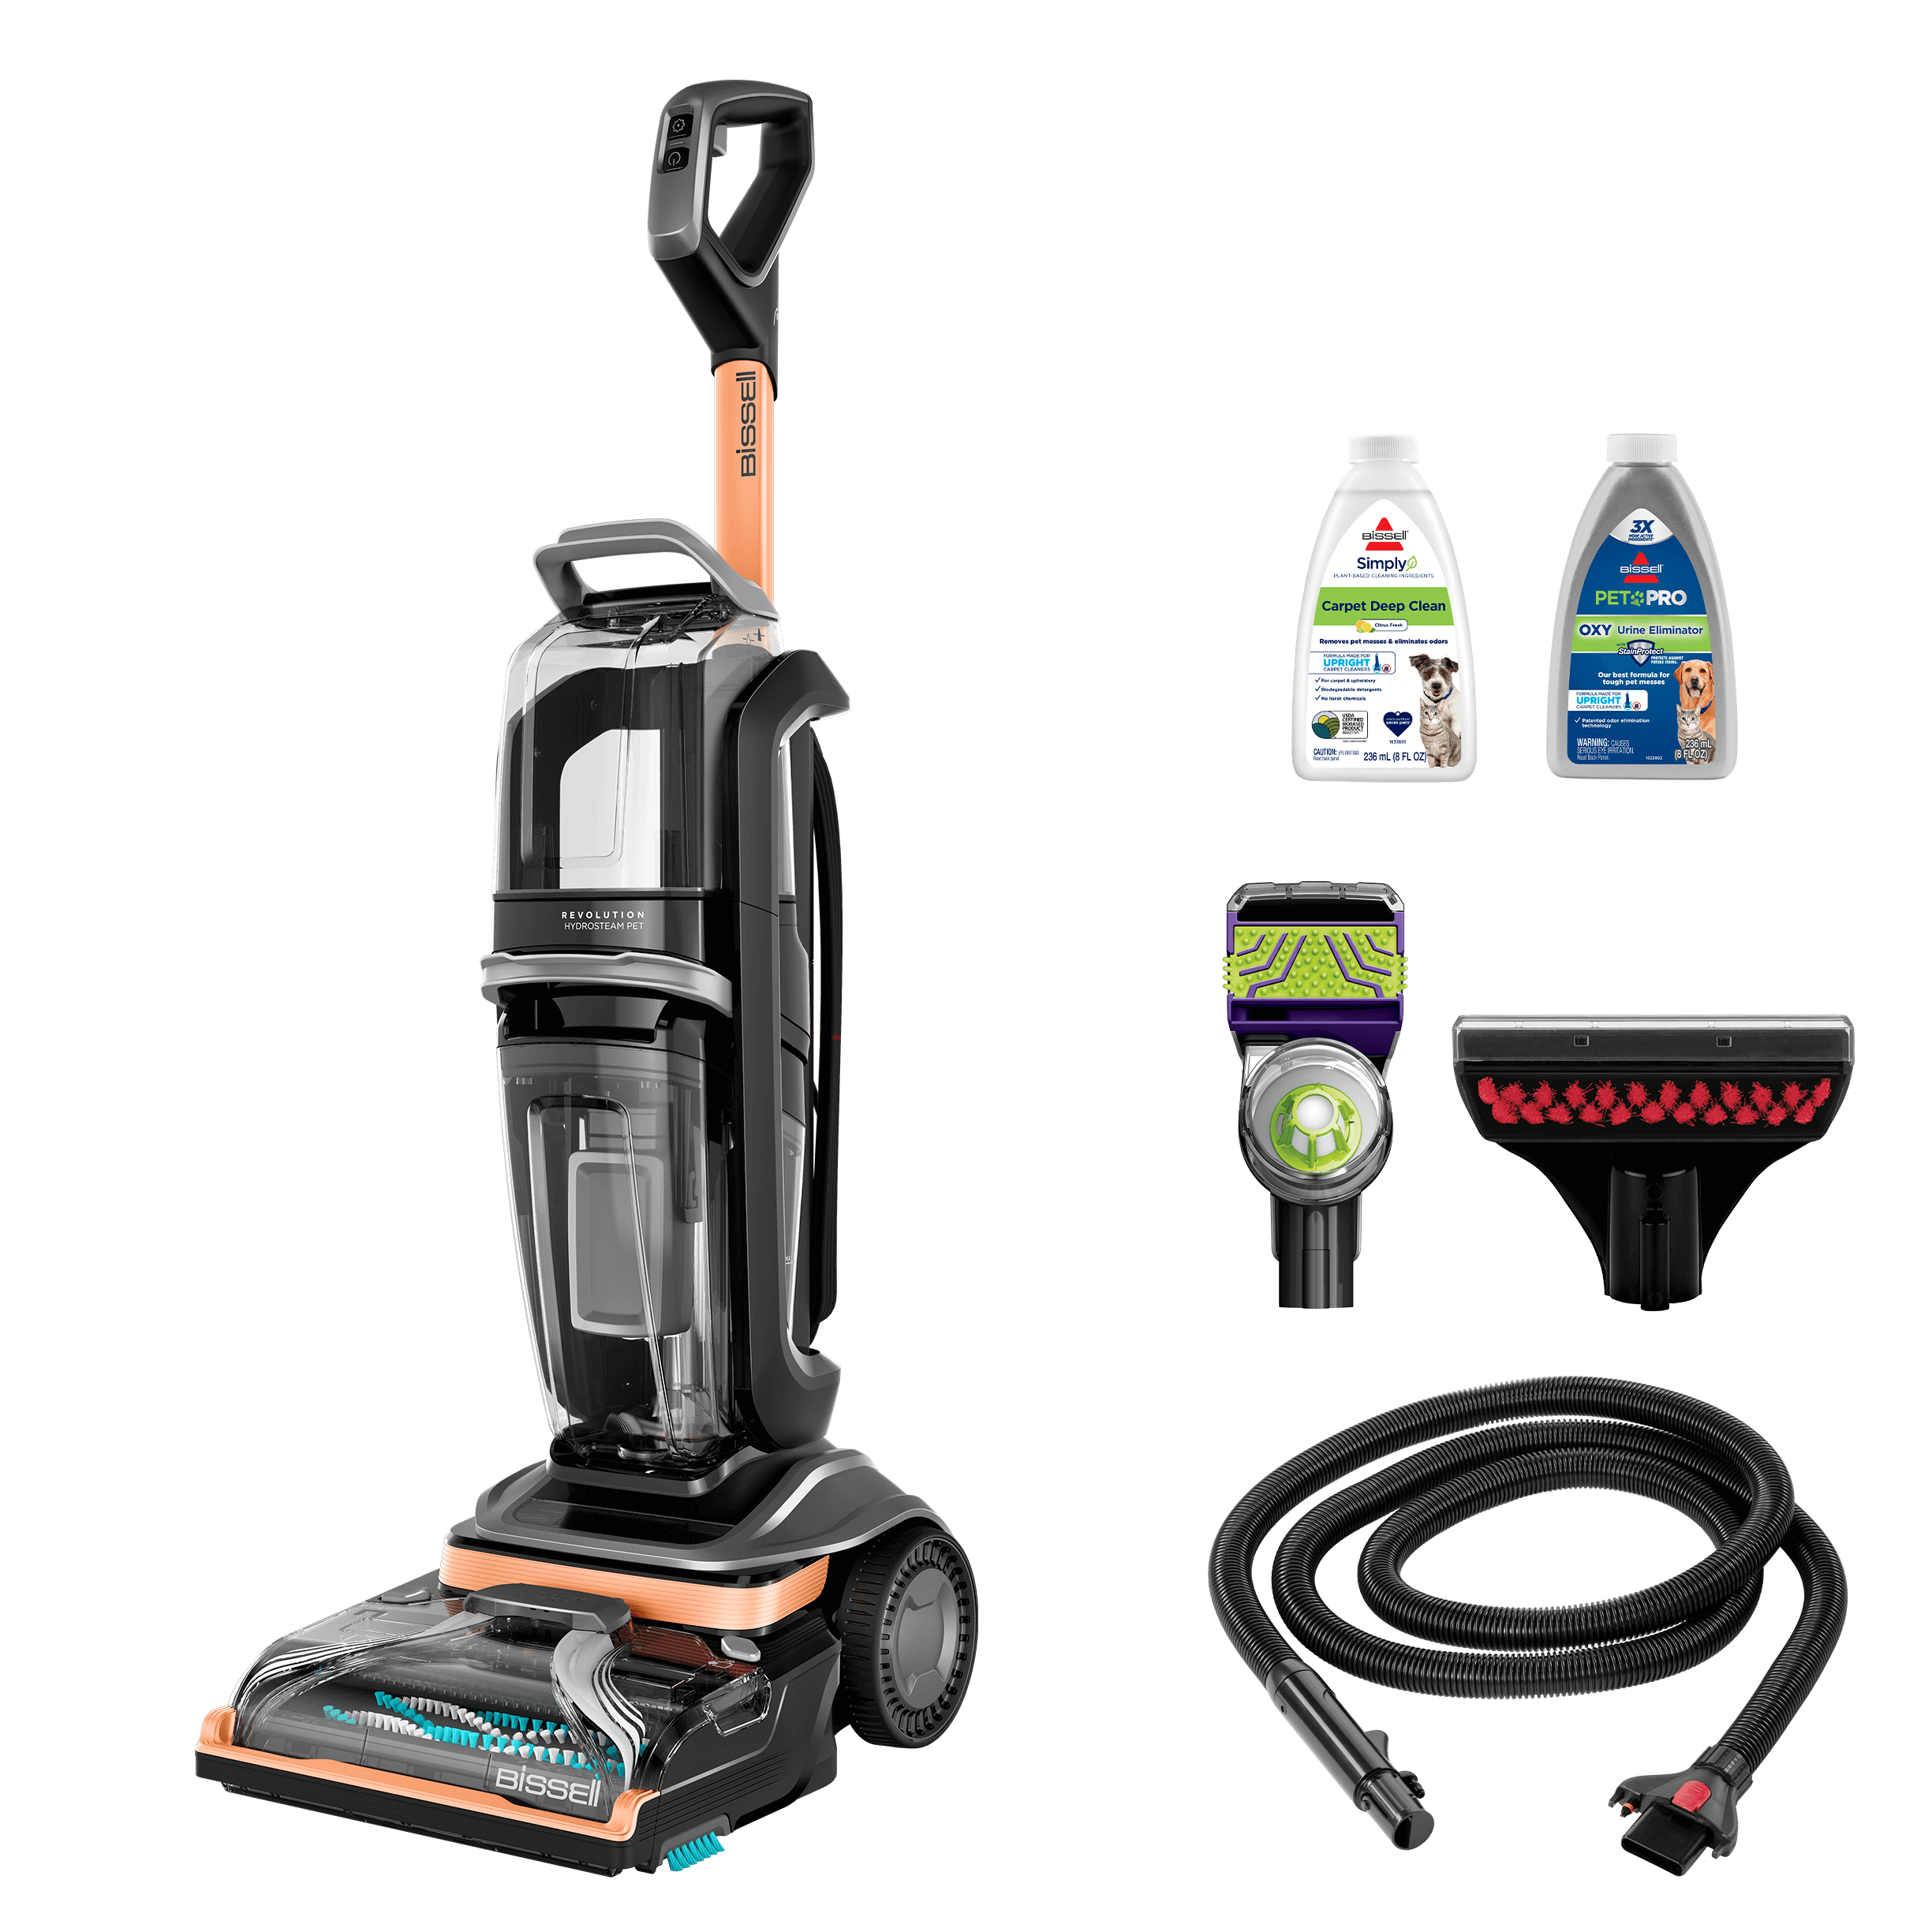 The Difference Between a Vacuum and a Carpet Steamer